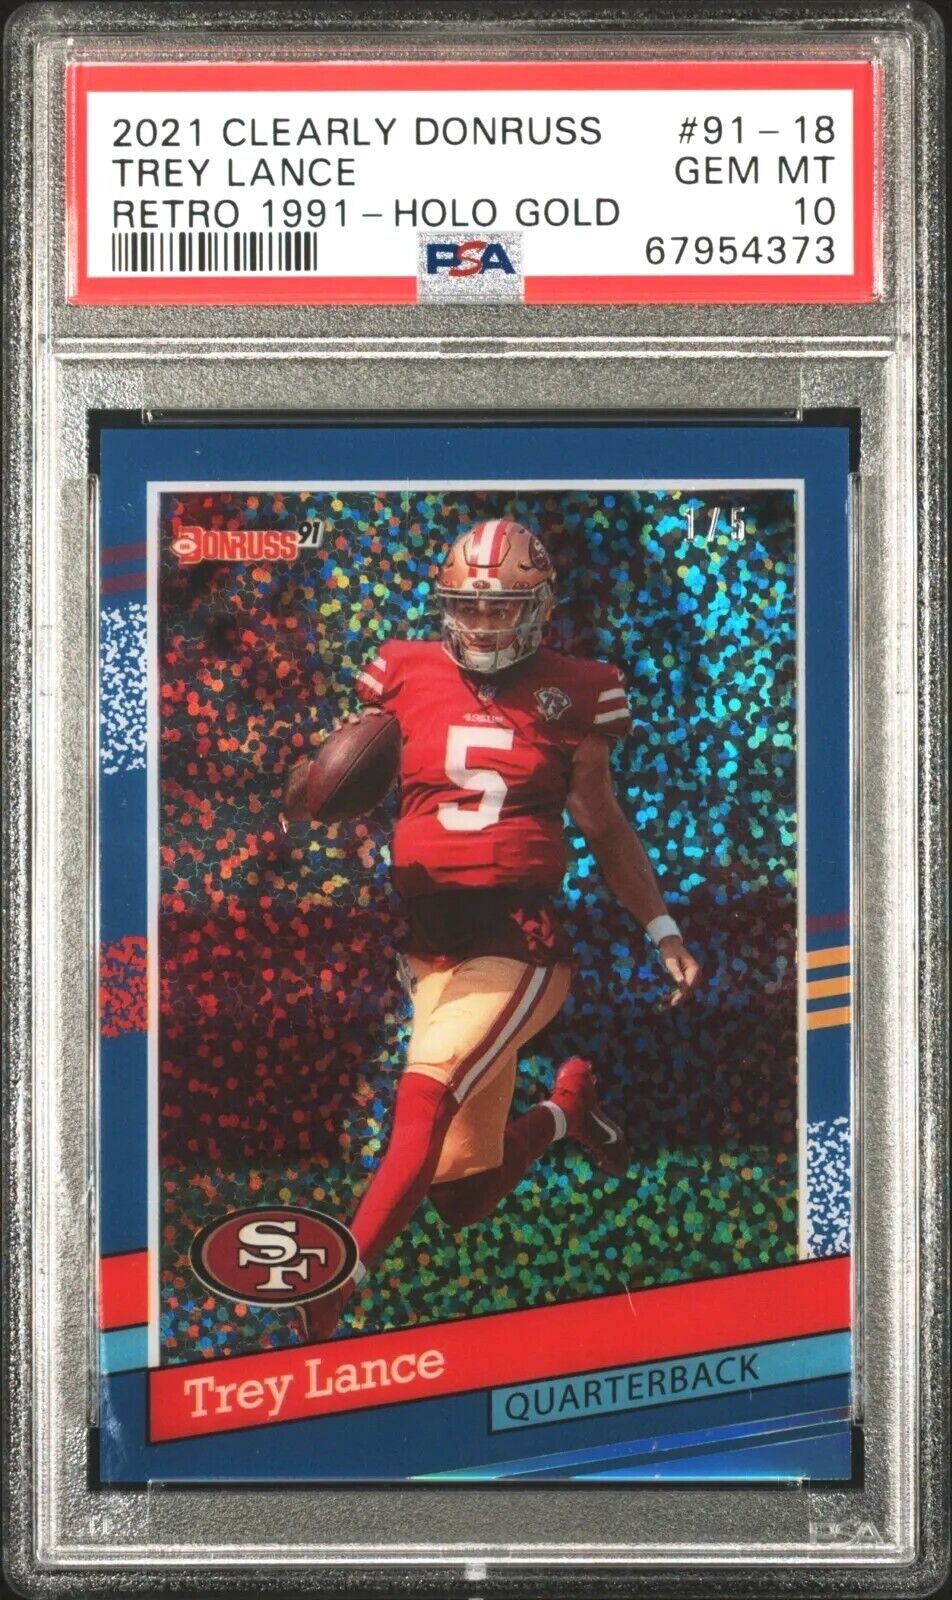 RARE 2021 Clearly Donruss Trey Lance Gold Holo Numbered /5 Rookie PSA 10 POP 1/1